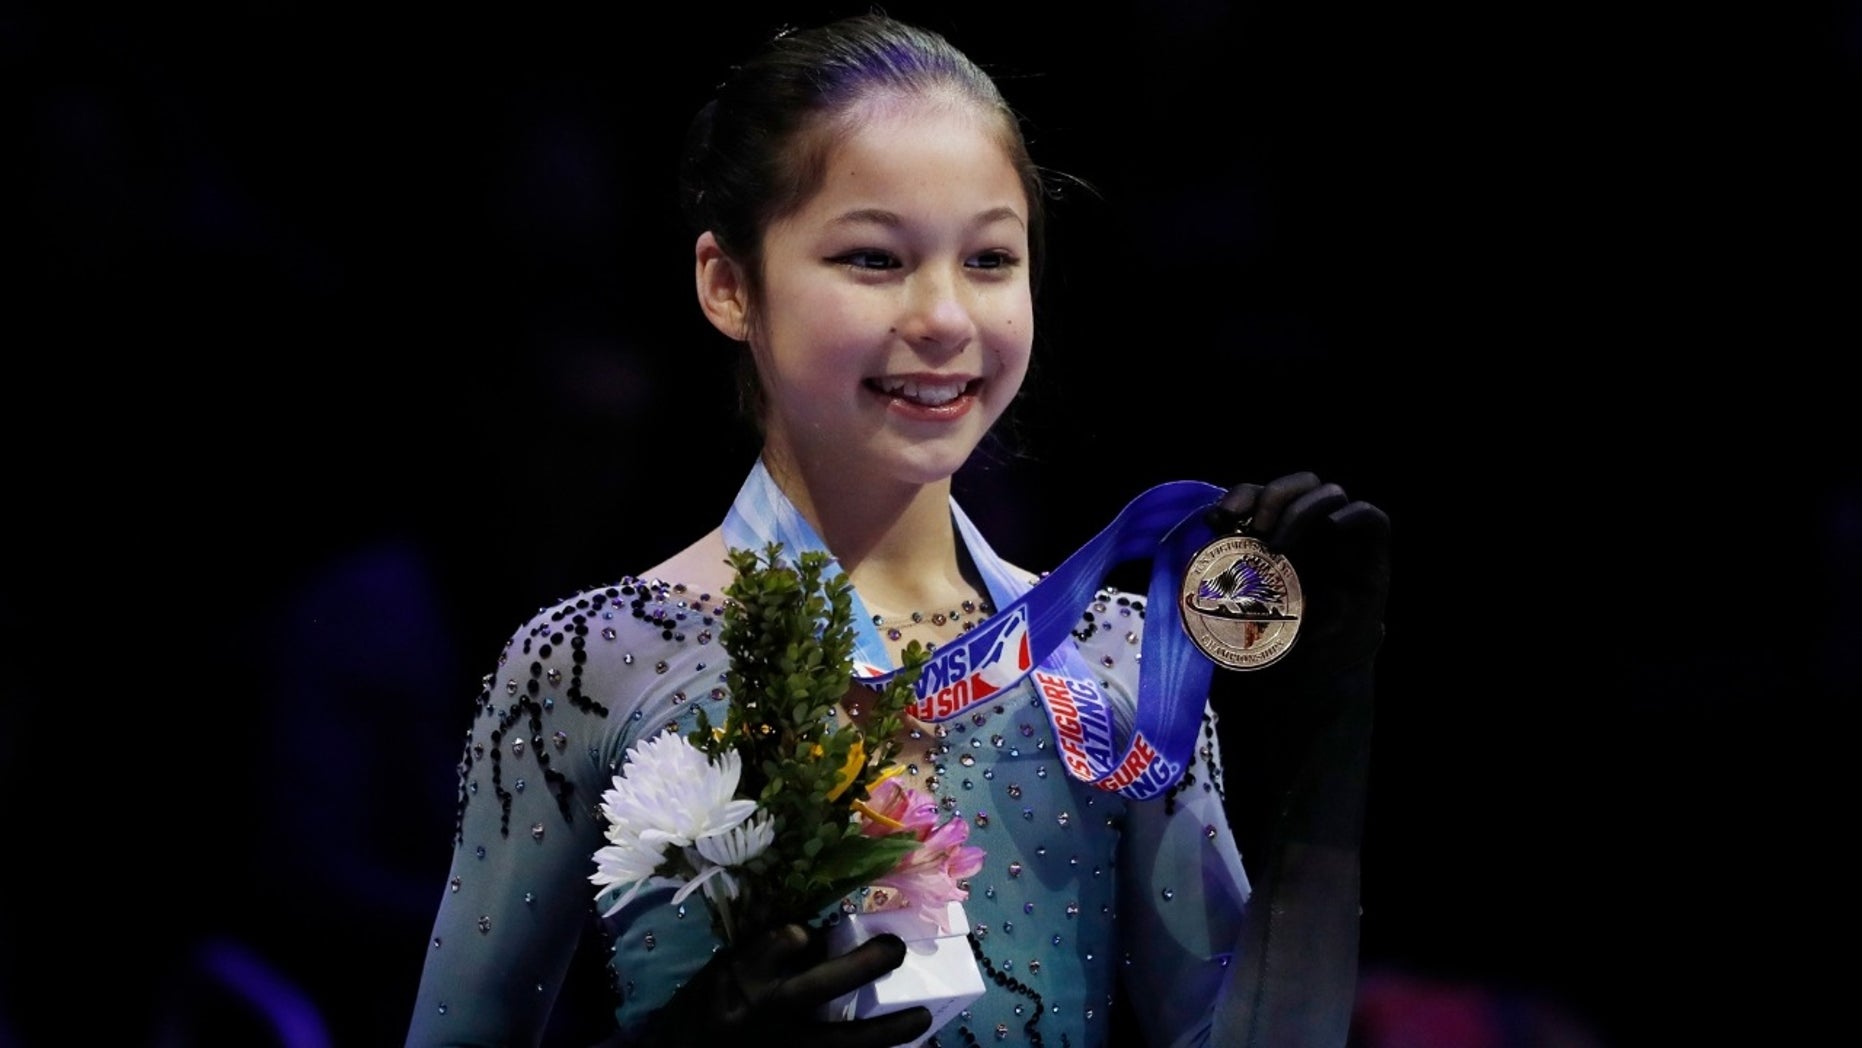 Alysa Liu, 13, becomes youngest winner of individual title at US Figure Skating Championships